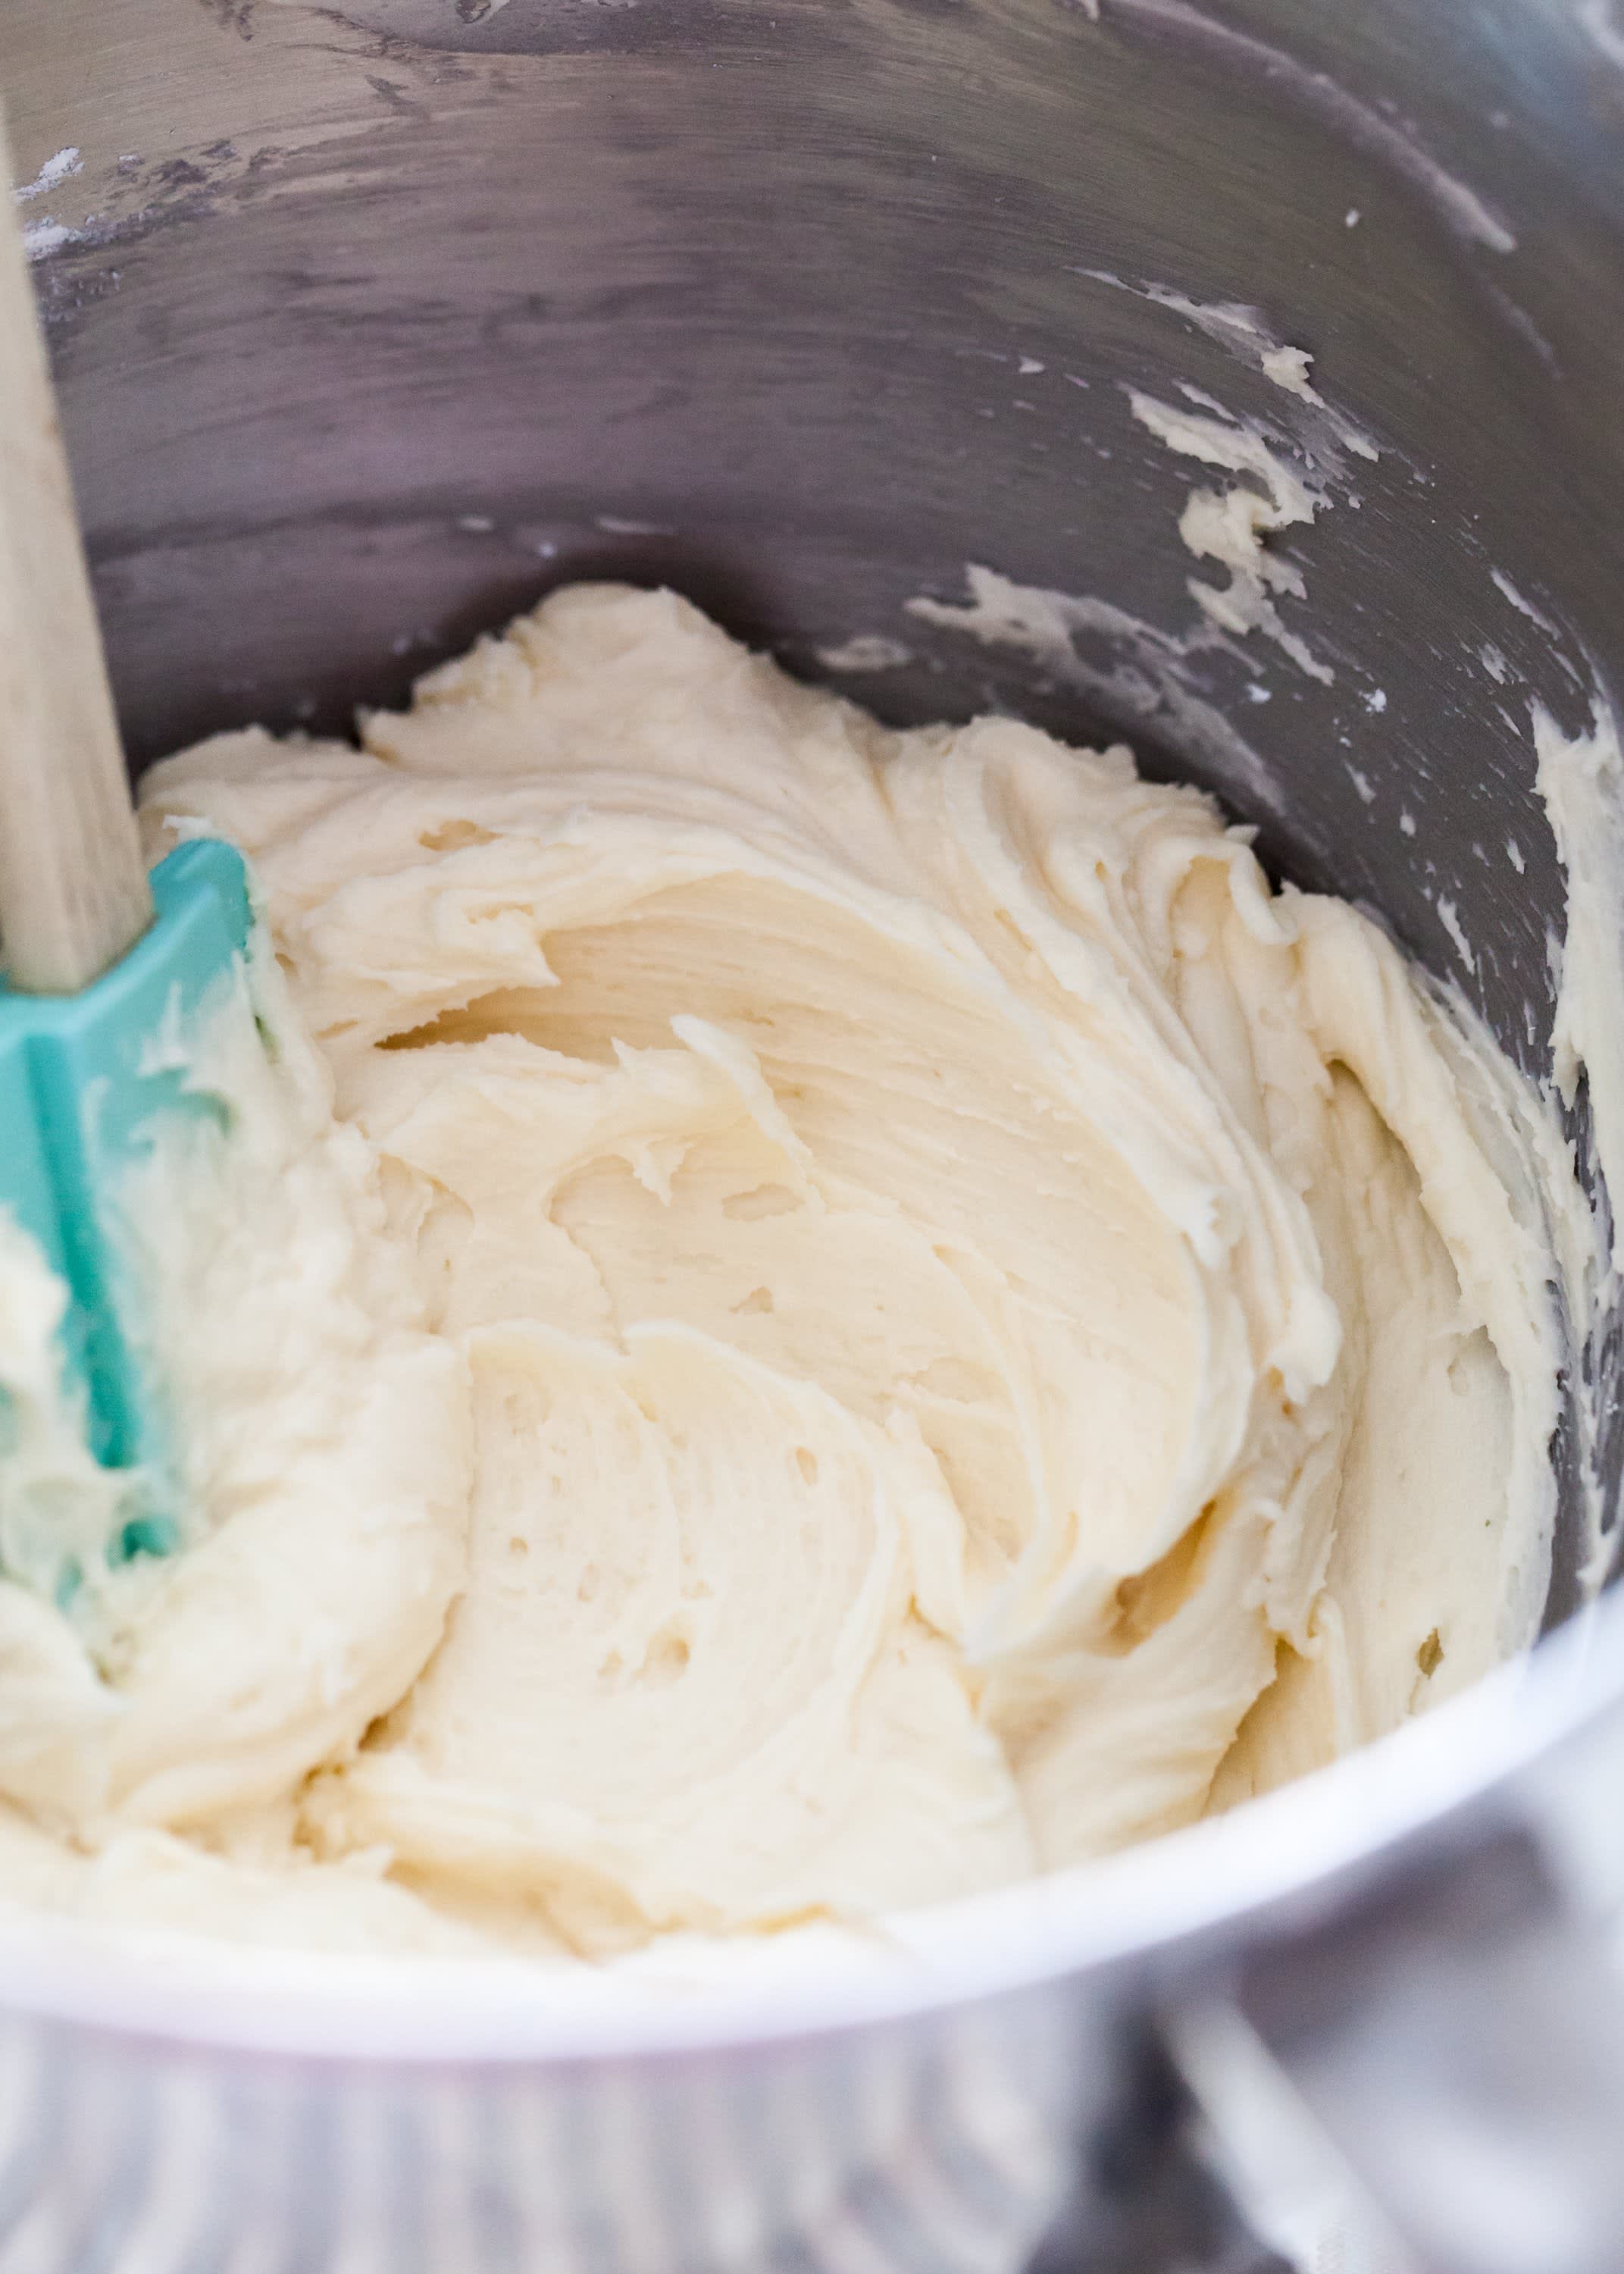 How To Make Buttercream Frosting: The Easiest Method | Kitchn